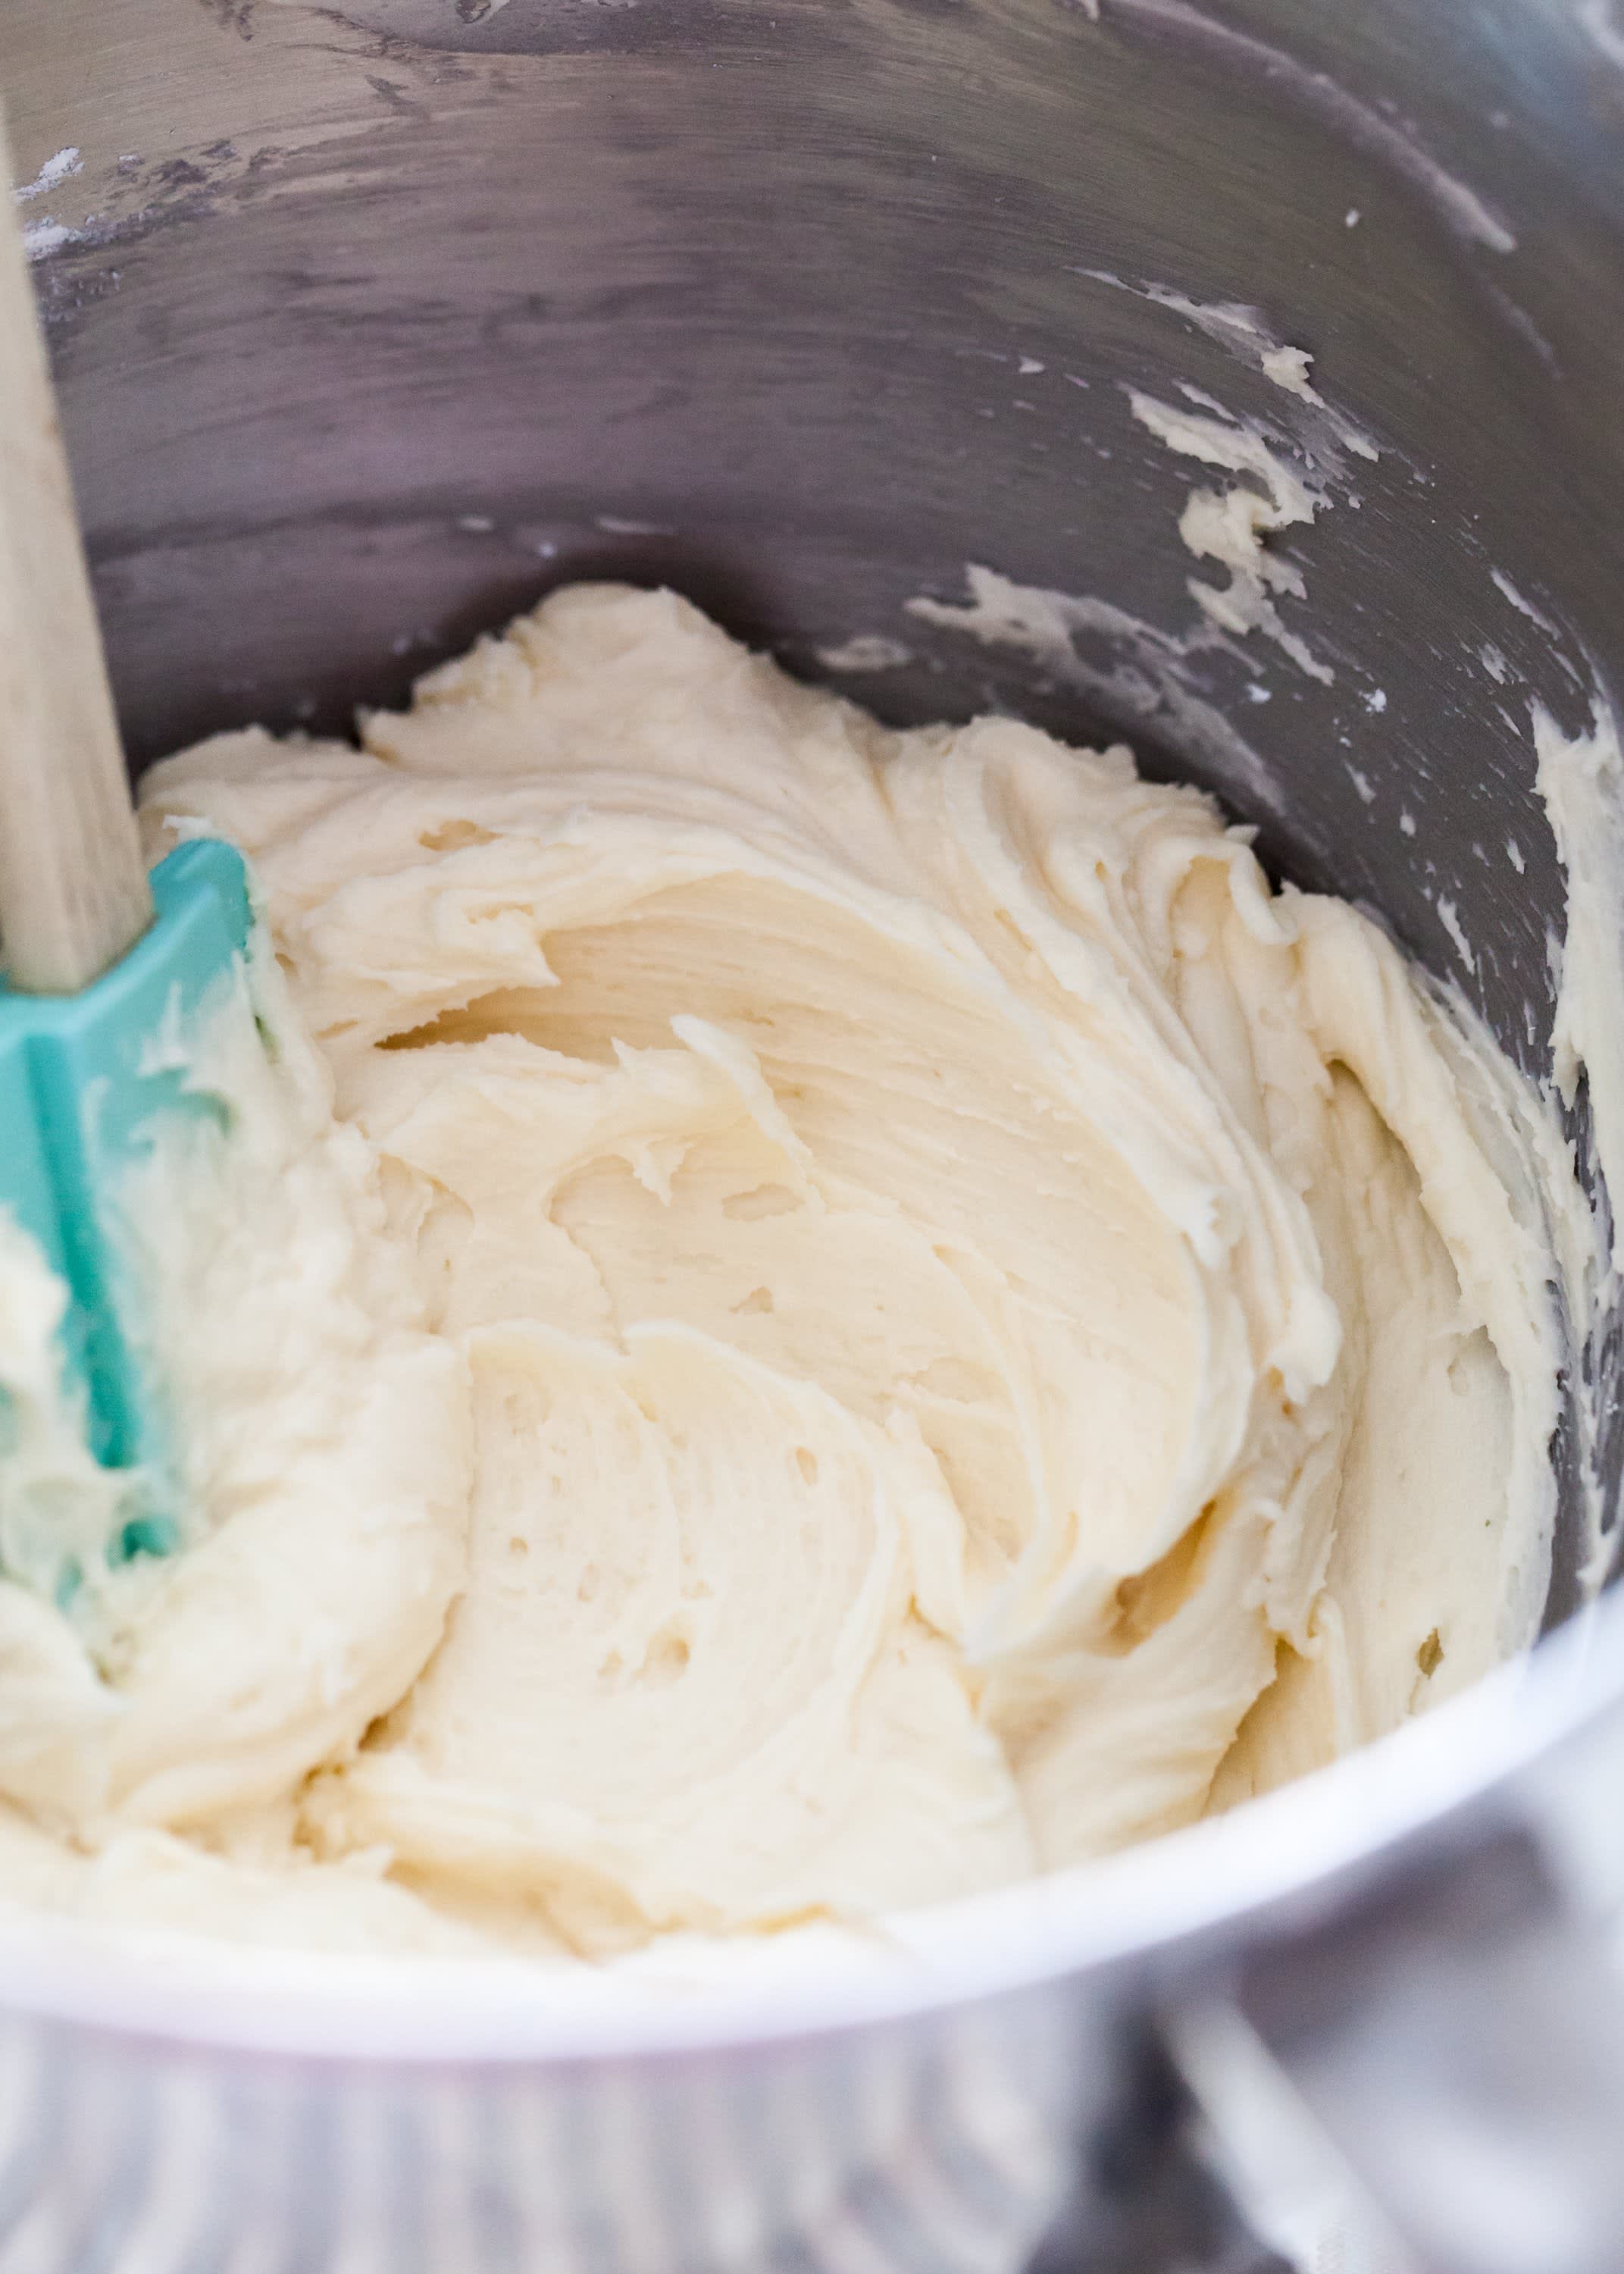 How To Make Buttercream Frosting: The Easiest Method | Kitchn